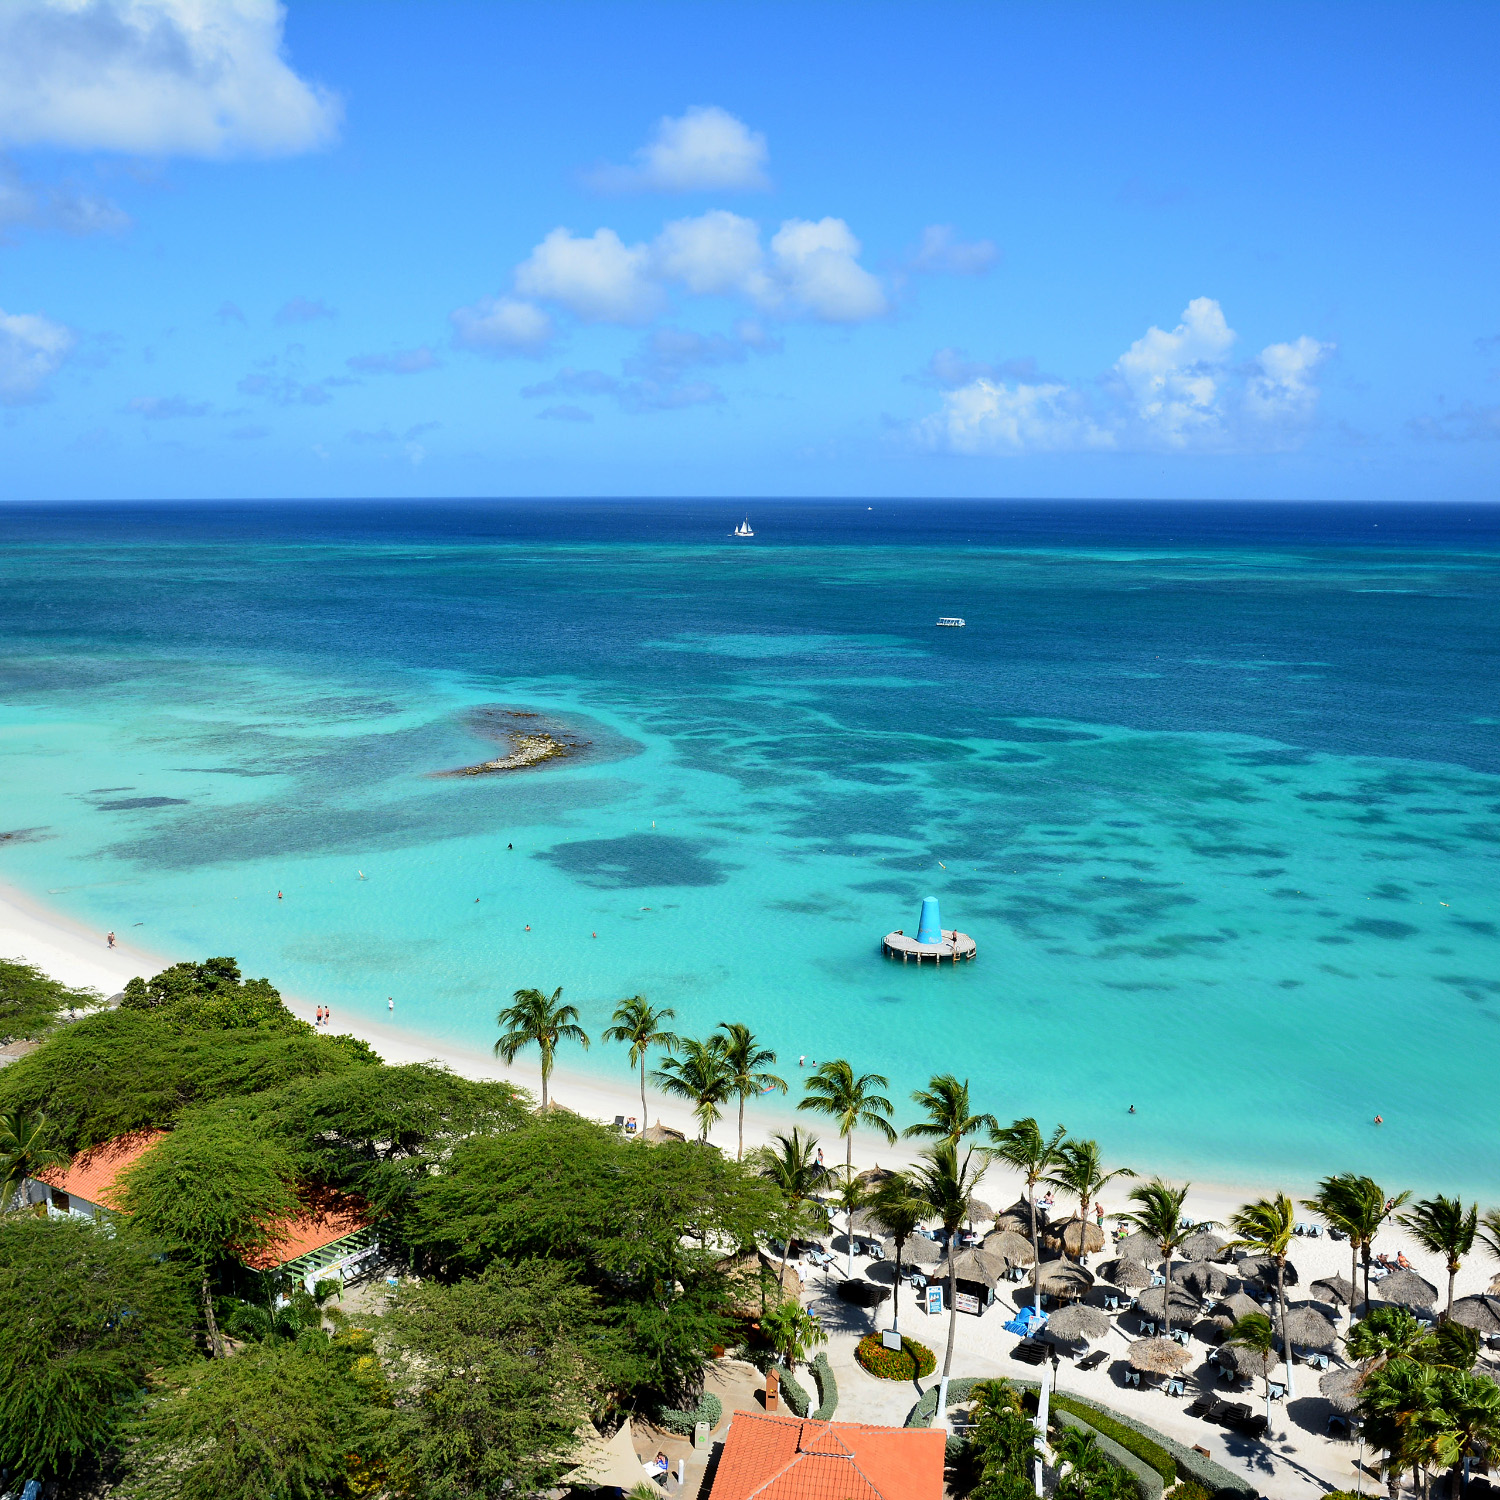 PHOTO: TripAdvisor reviewers described Eagle Beach, Aruba as quiet and serene, with few crowds.